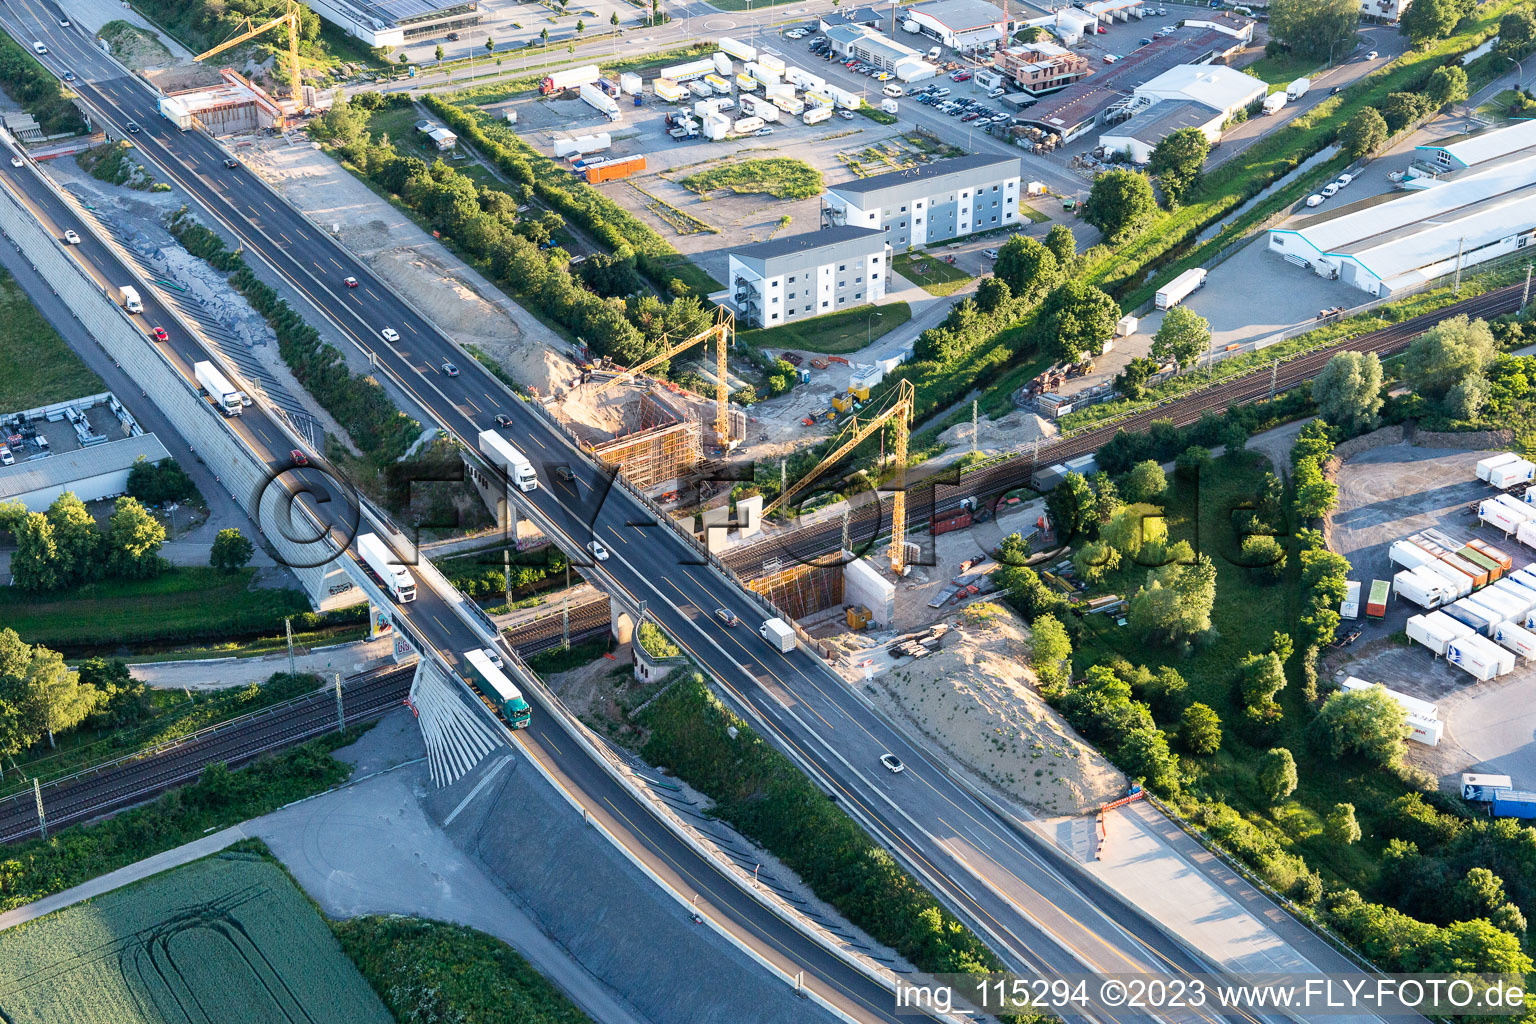 Construction site A5 motorway bridge over the railway tracks in the district Karlsdorf in Karlsdorf-Neuthard in the state Baden-Wuerttemberg, Germany